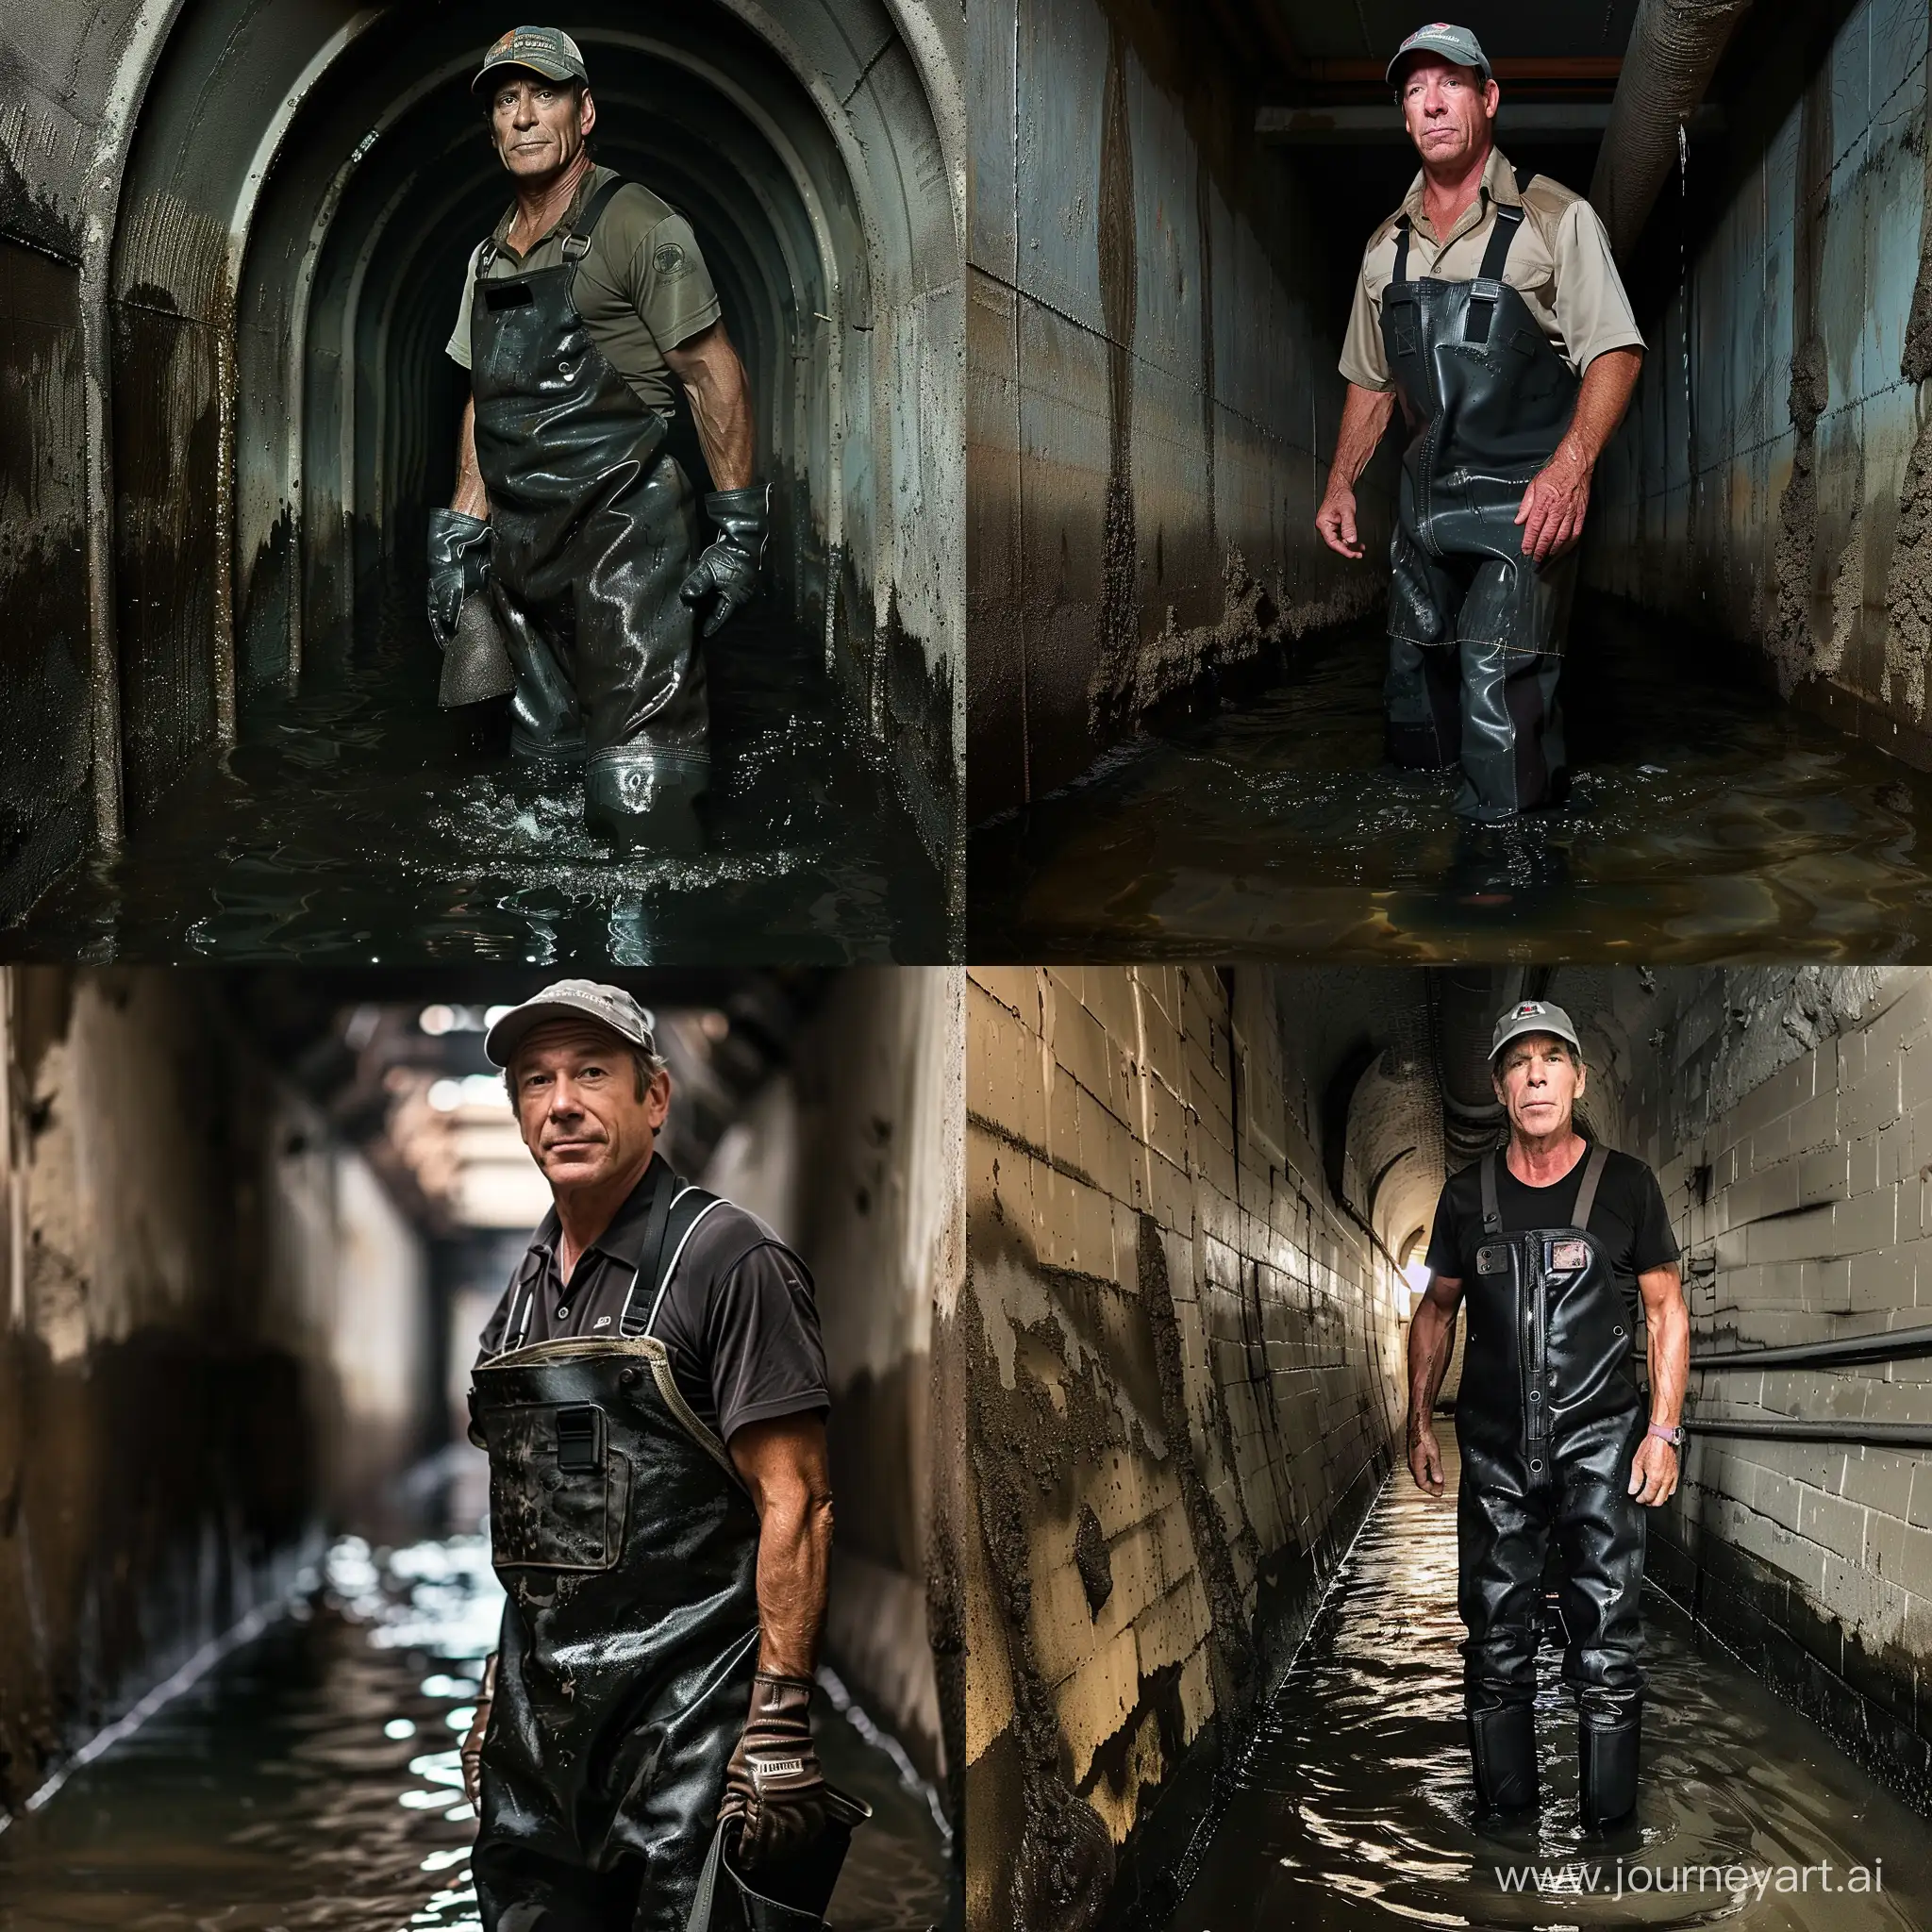 Mike Rowe wearing waders in a sewer